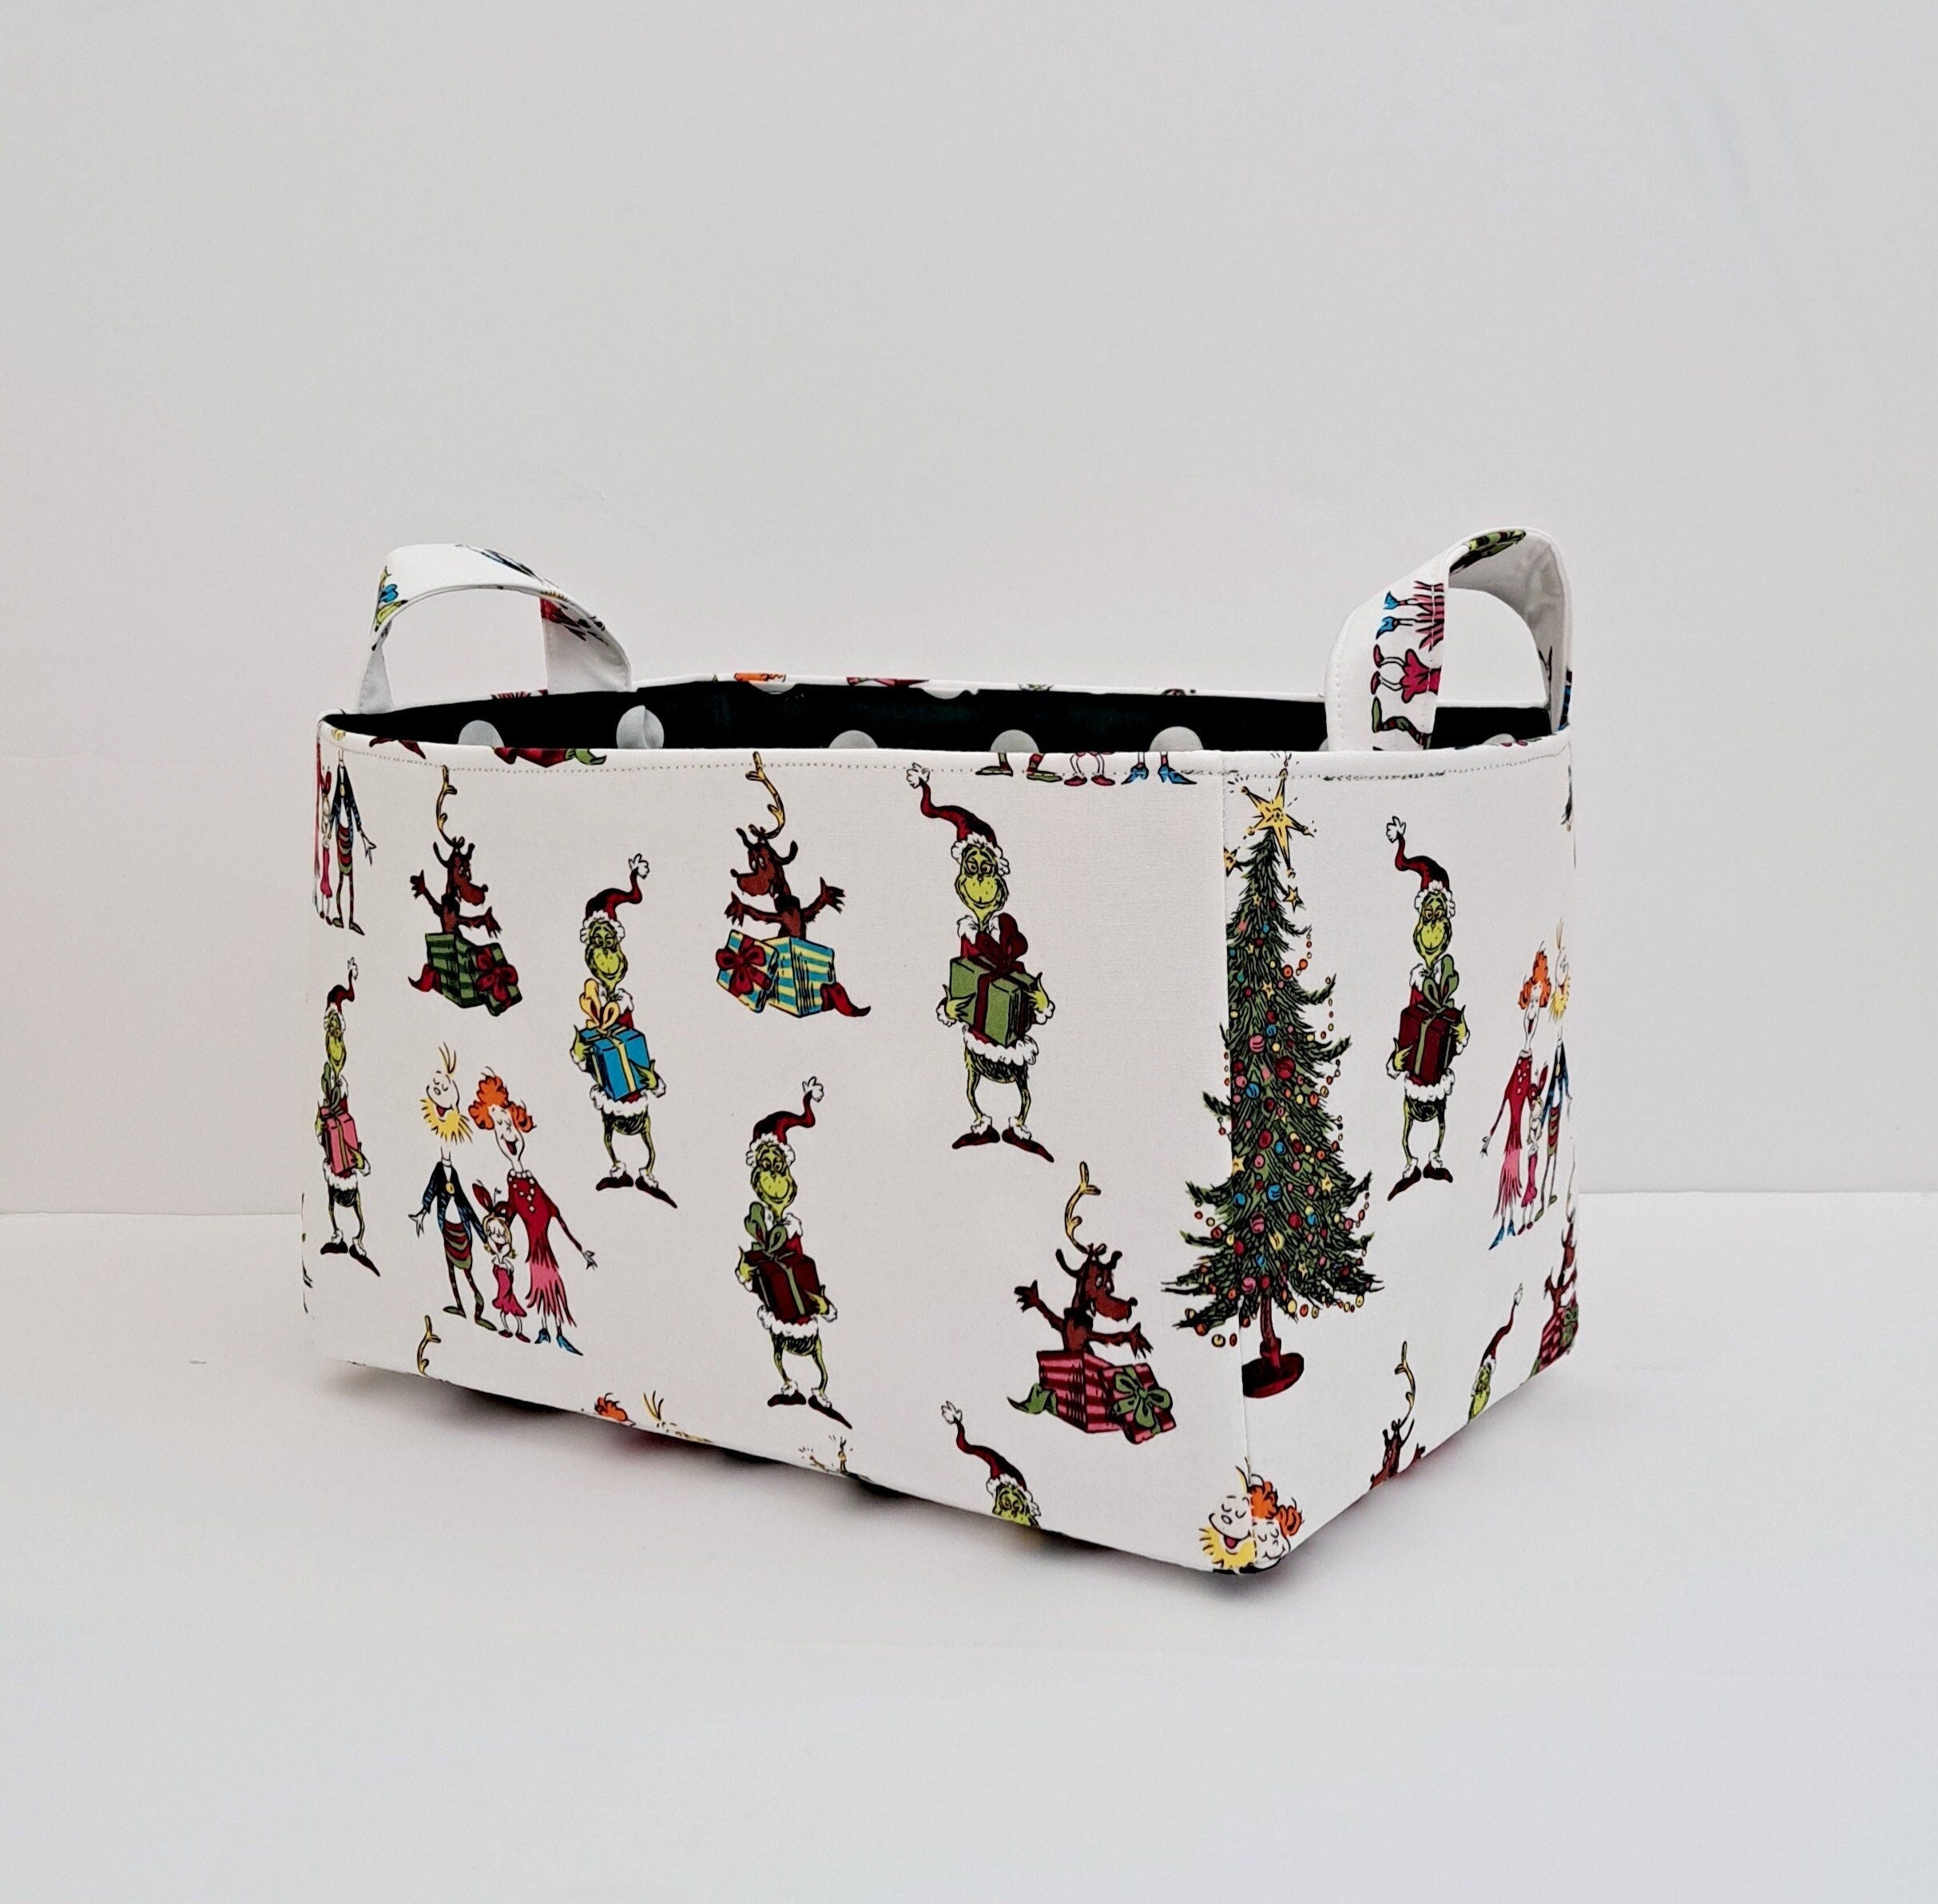 How the Grinch stole Christmas basket, Holiday gift organizer bin caddy, Fabric container